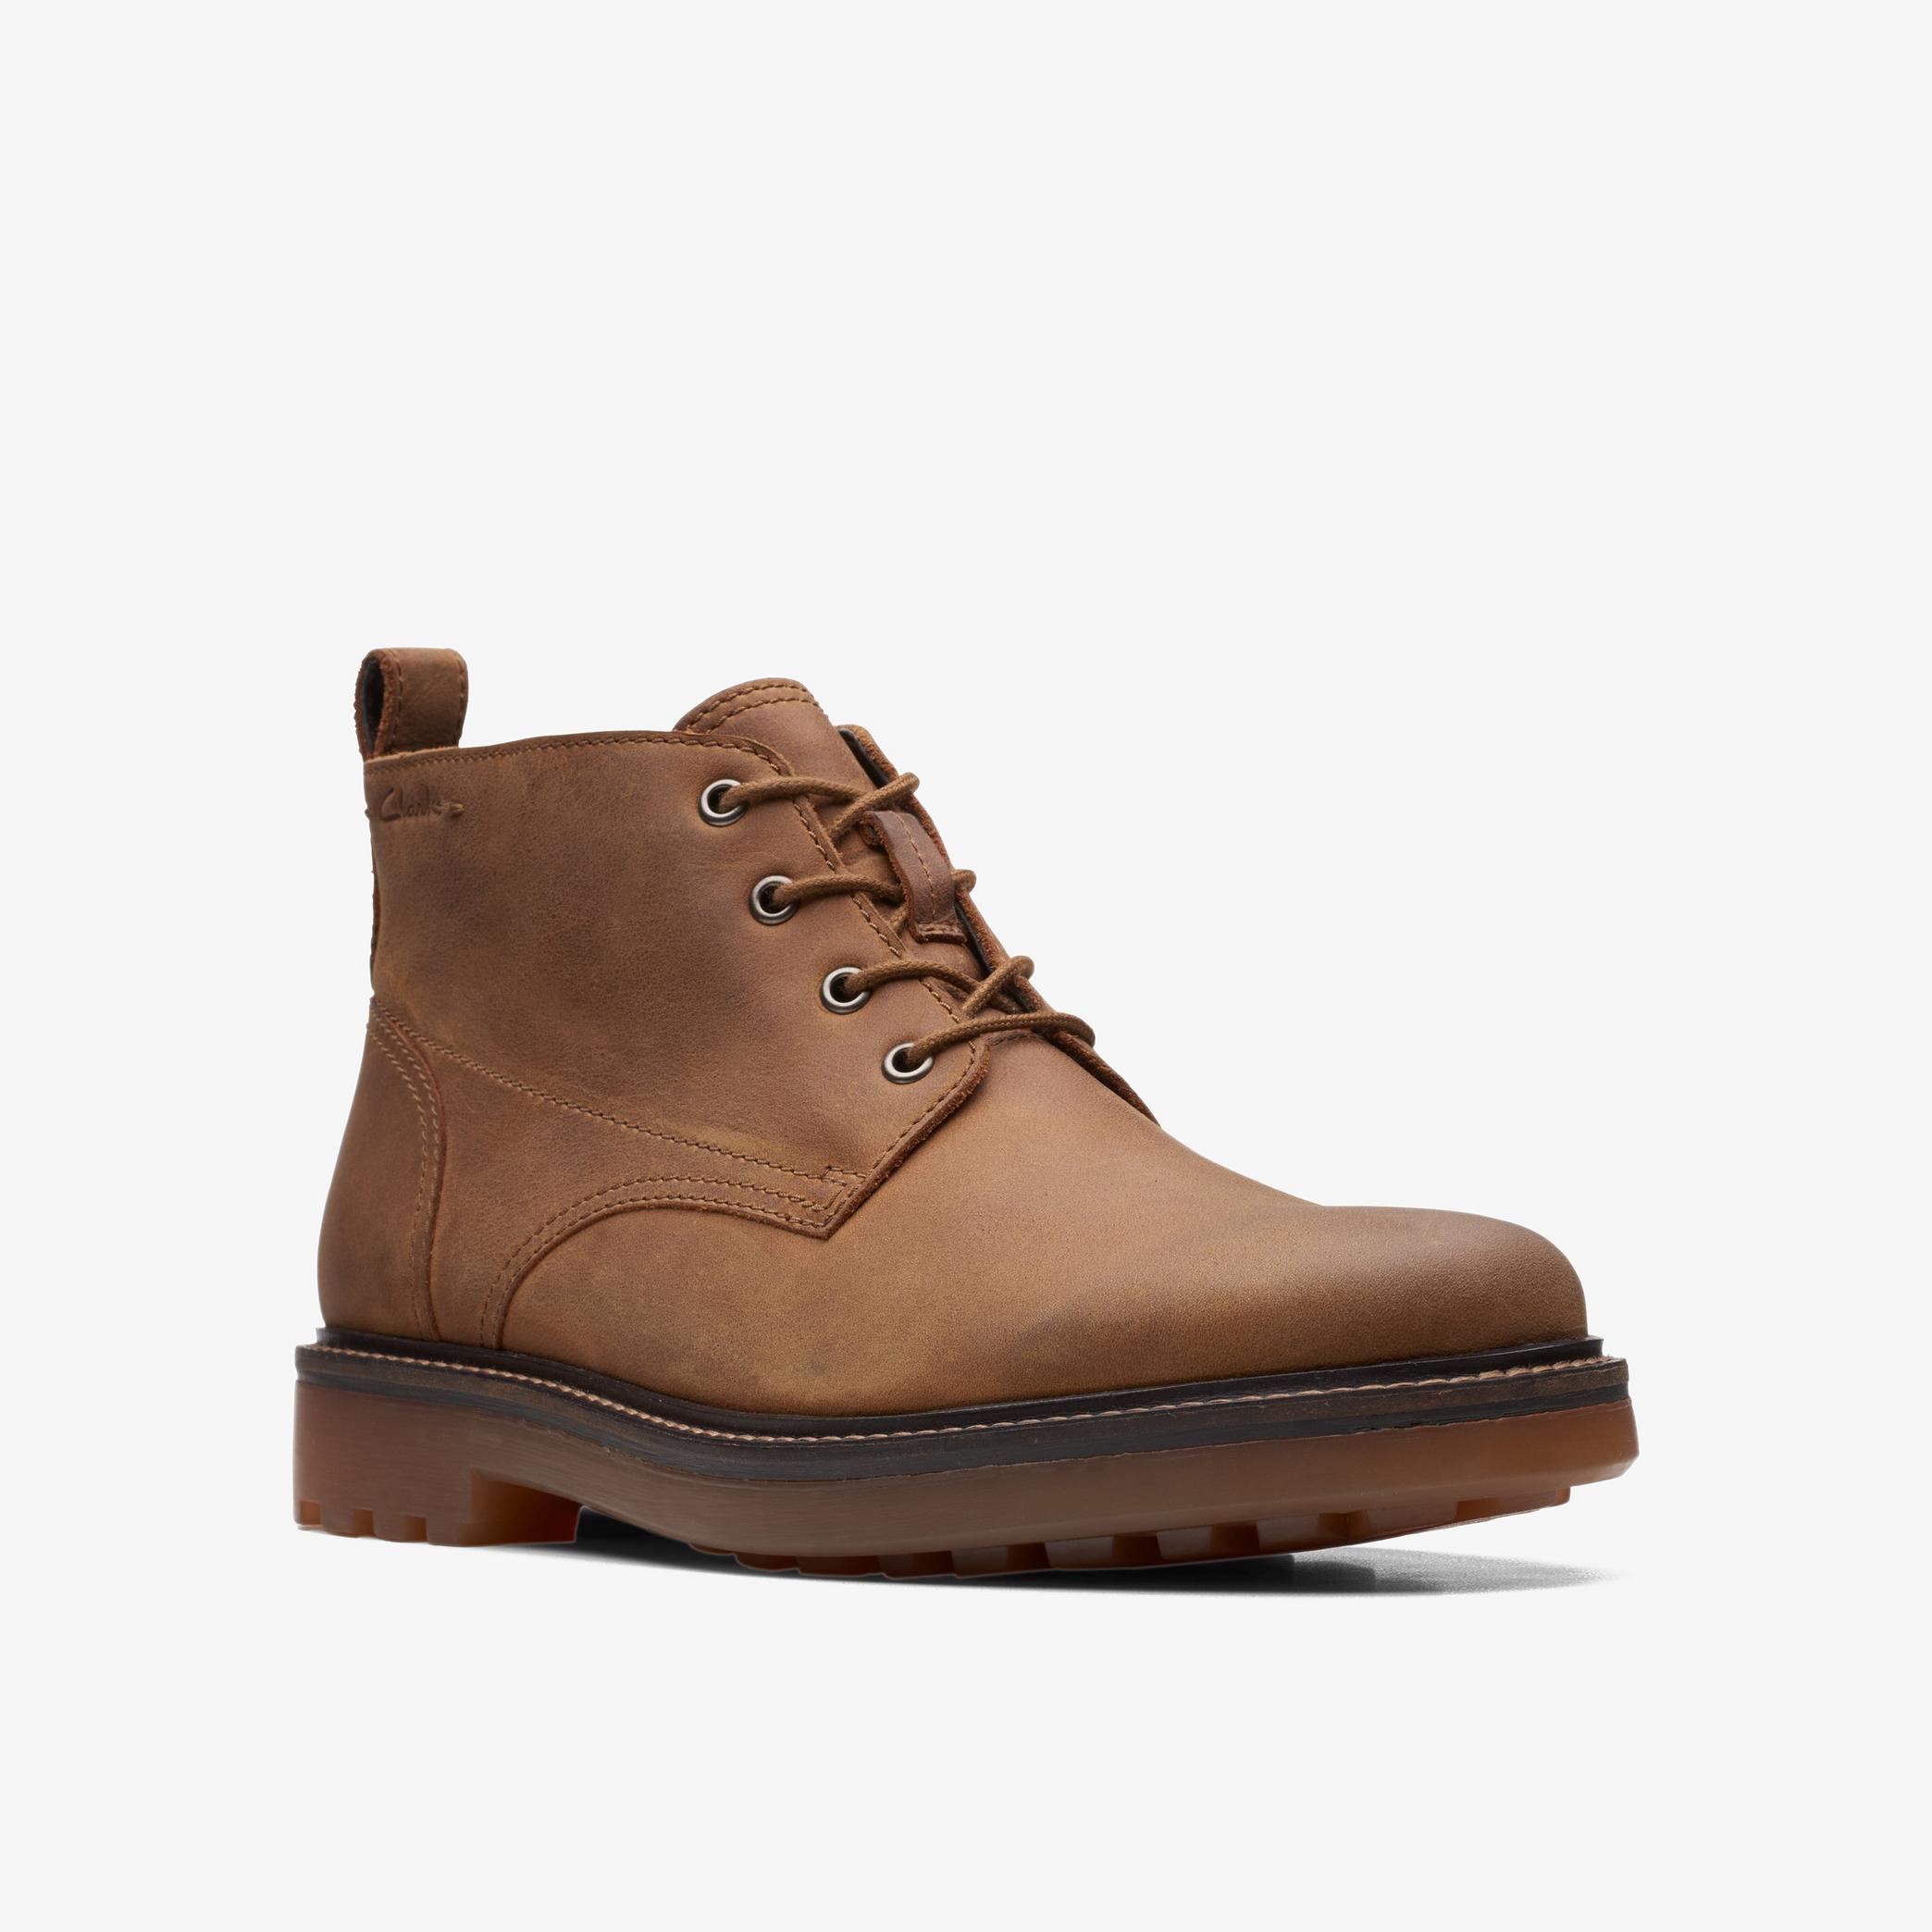 Chard Mid Dark Tan Nubuck Ankle Boots, view 3 of 6